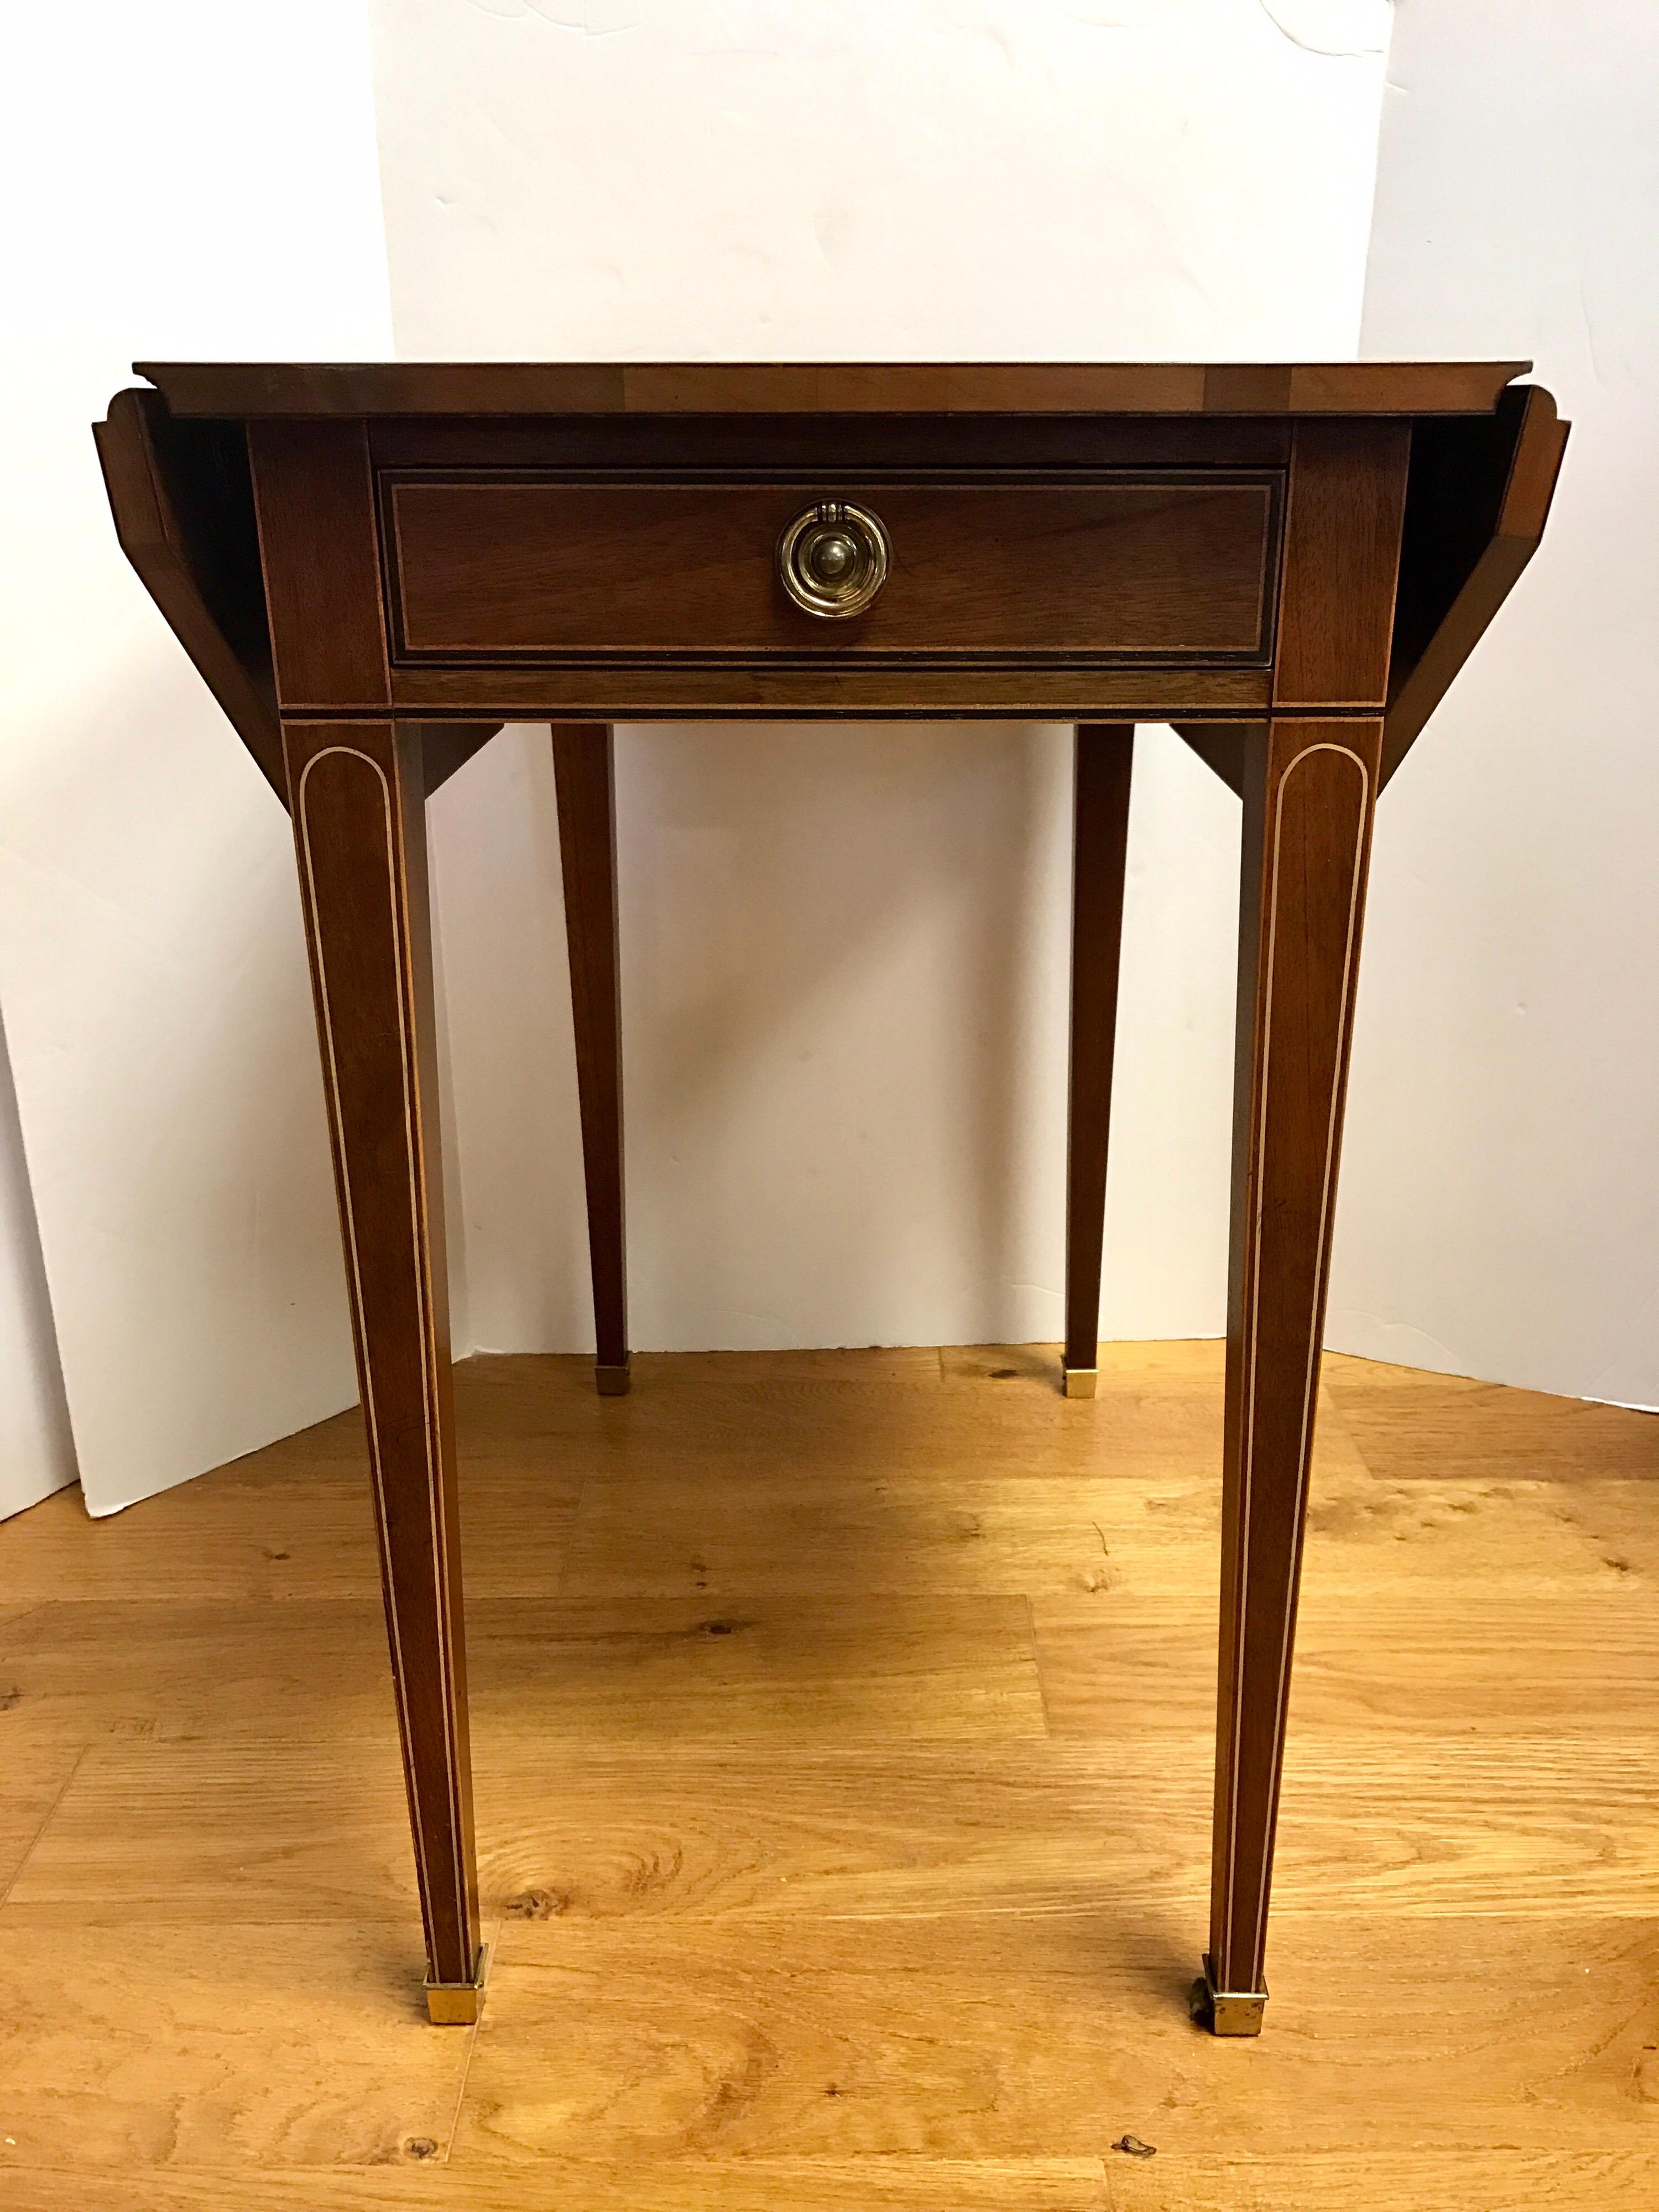 Baker Furniture mahogany drop leaf table that goes from seventeen inches wide to 31 inches when both leaves are up. Features brass feet, an elegant inlay and a lone center drawer.